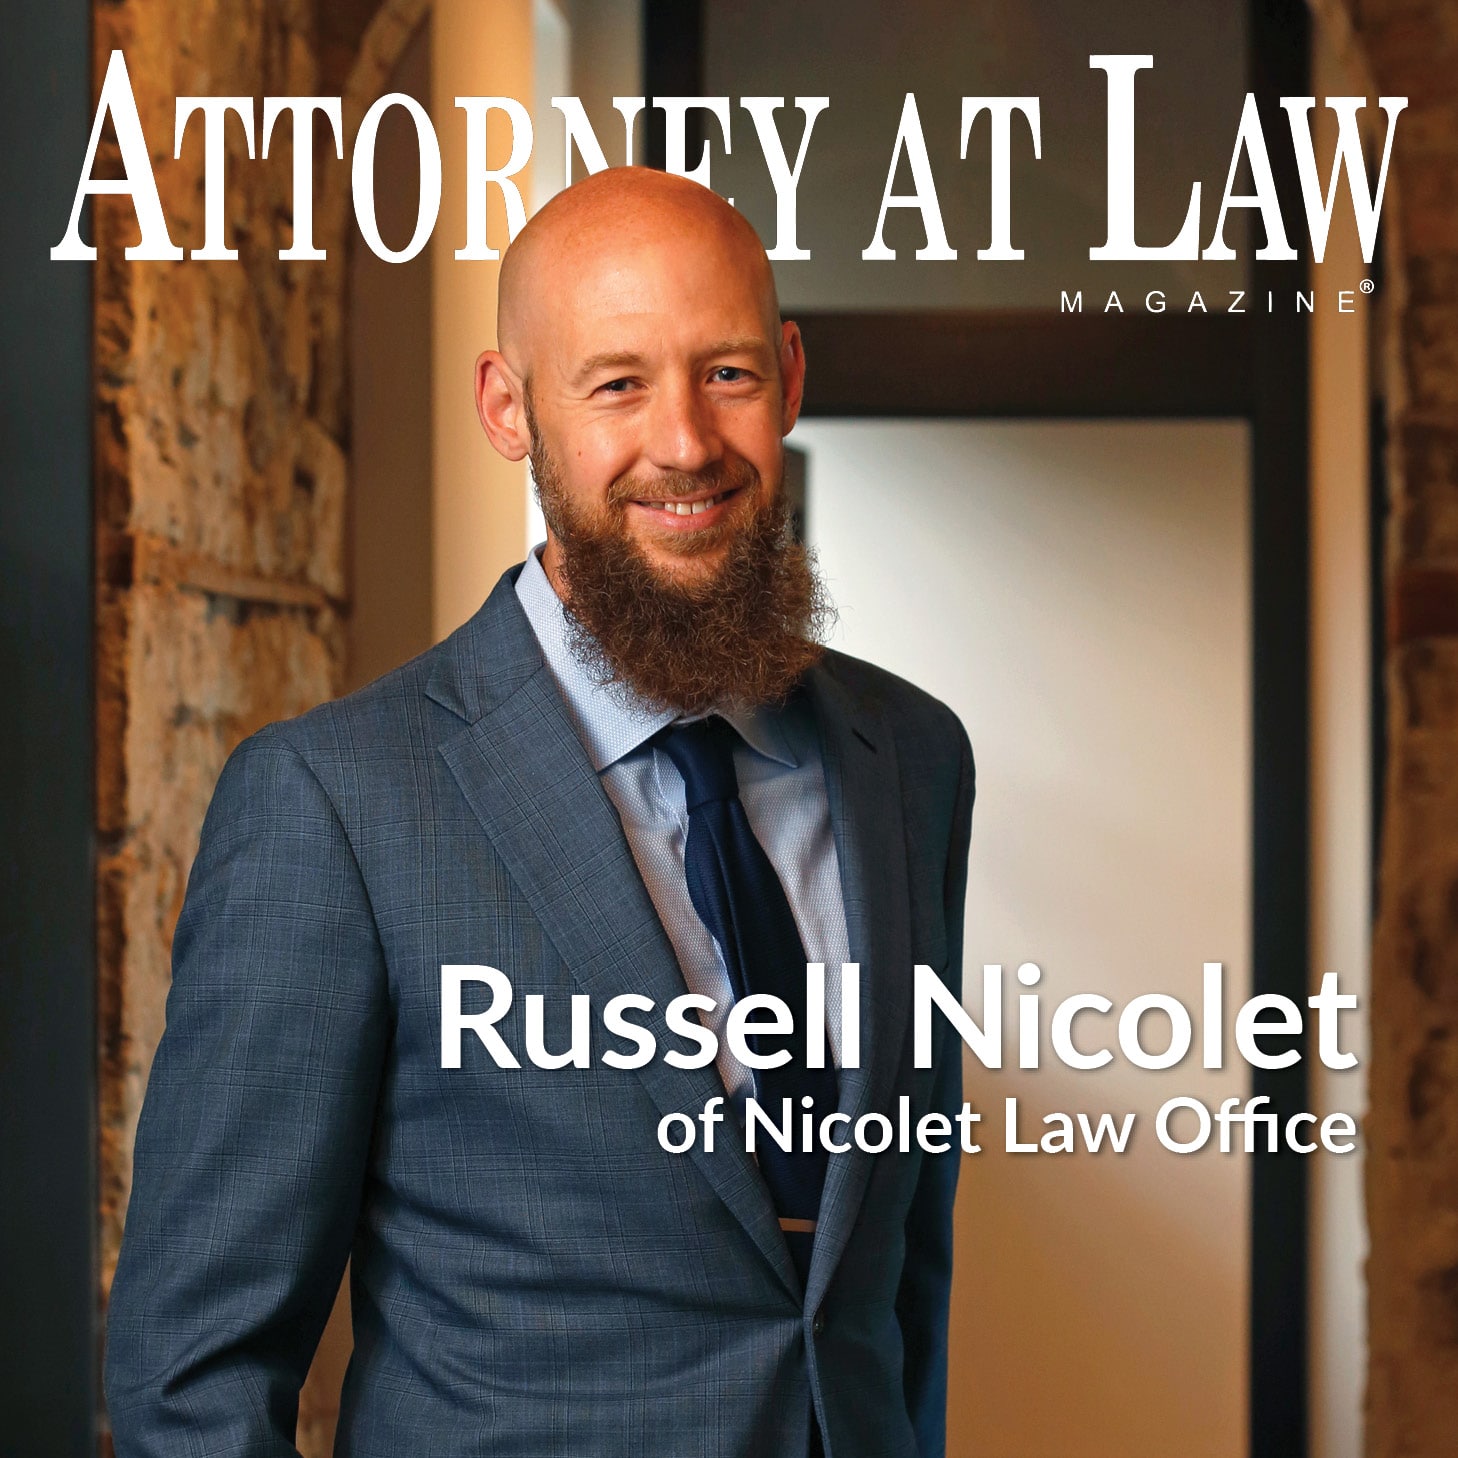 Russell Attorney At Law Cover